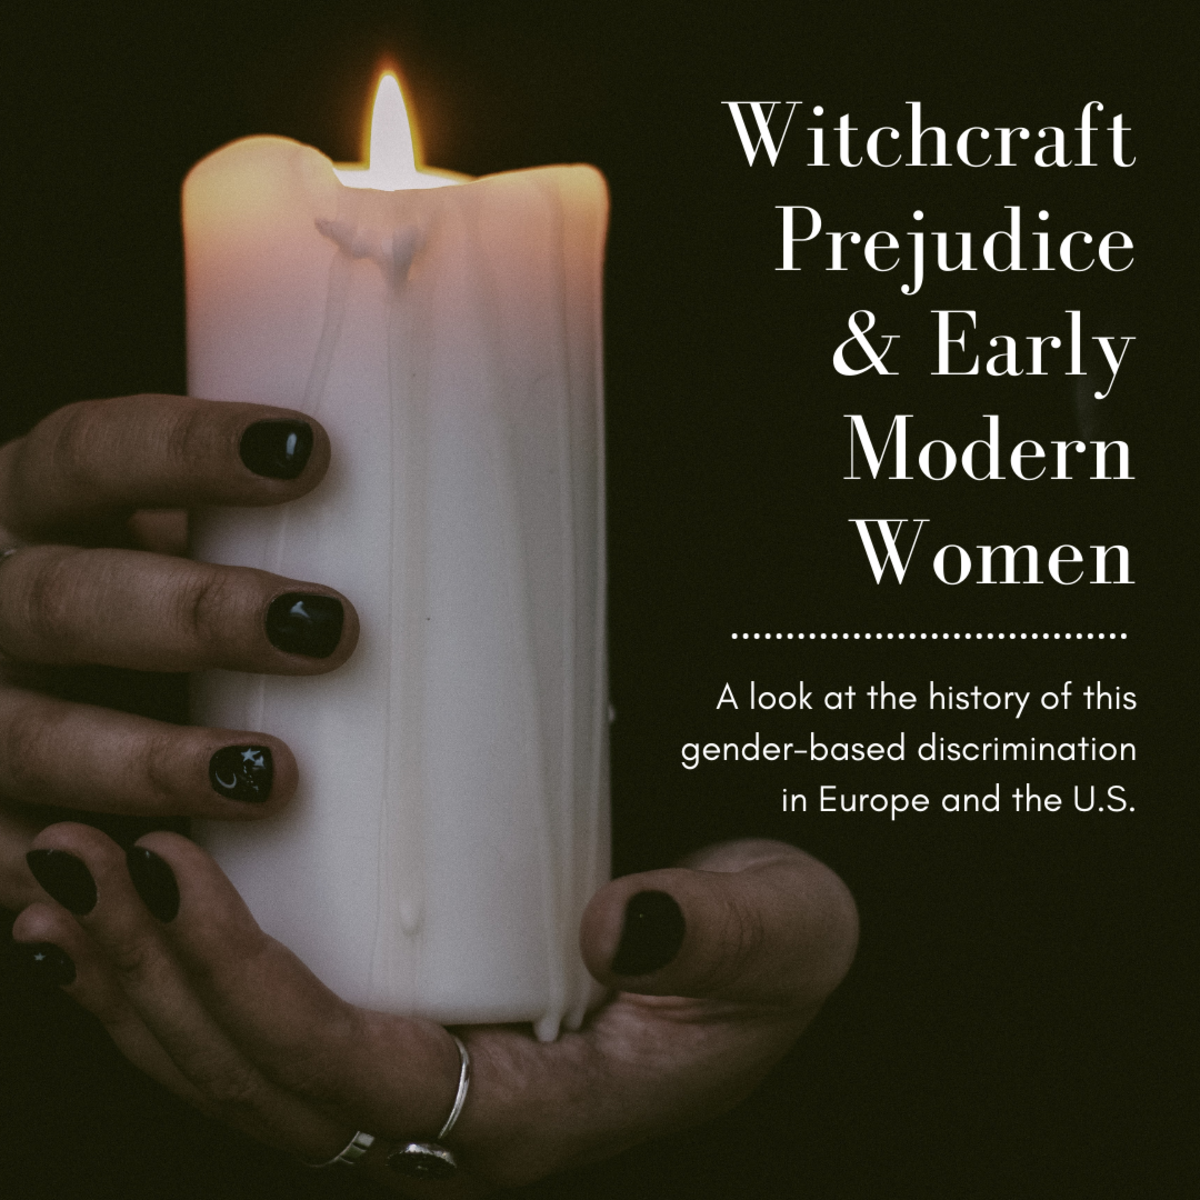 This article will take a look at the history and effects of witchcraft prejudice and intolerance against early modern women in Europe and the United States.